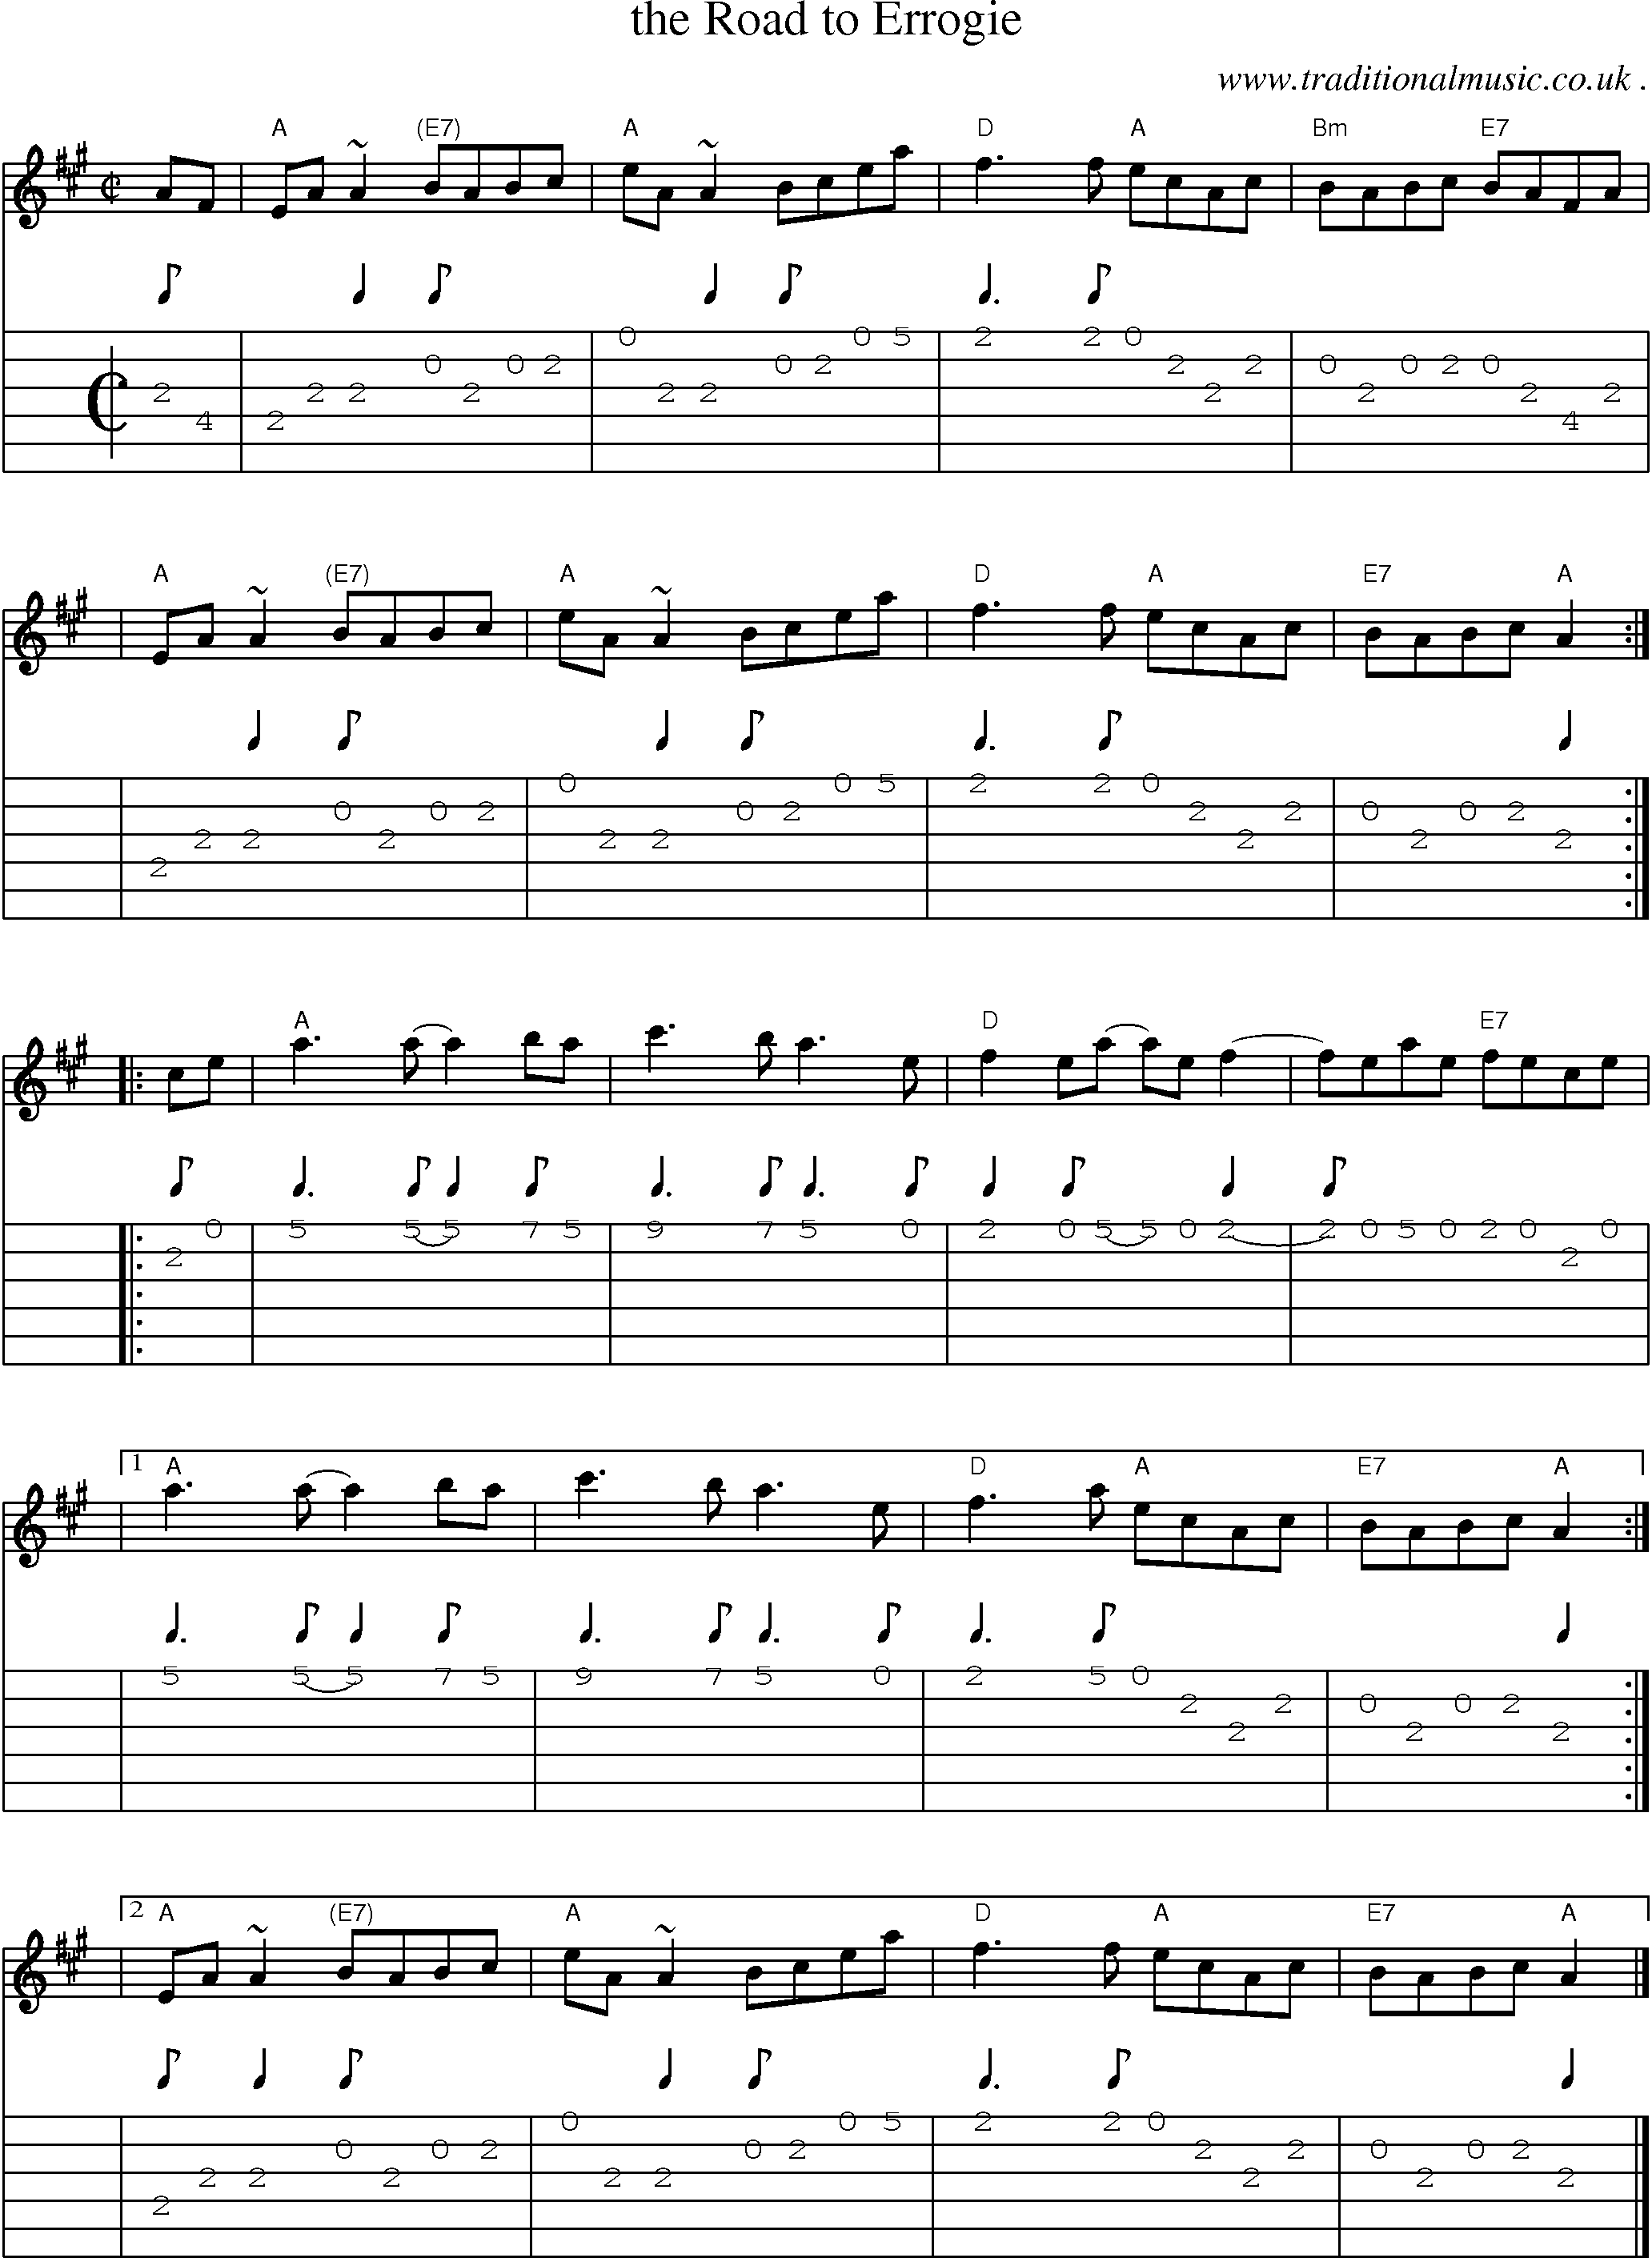 Sheet-music  score, Chords and Guitar Tabs for The Road To Errogie